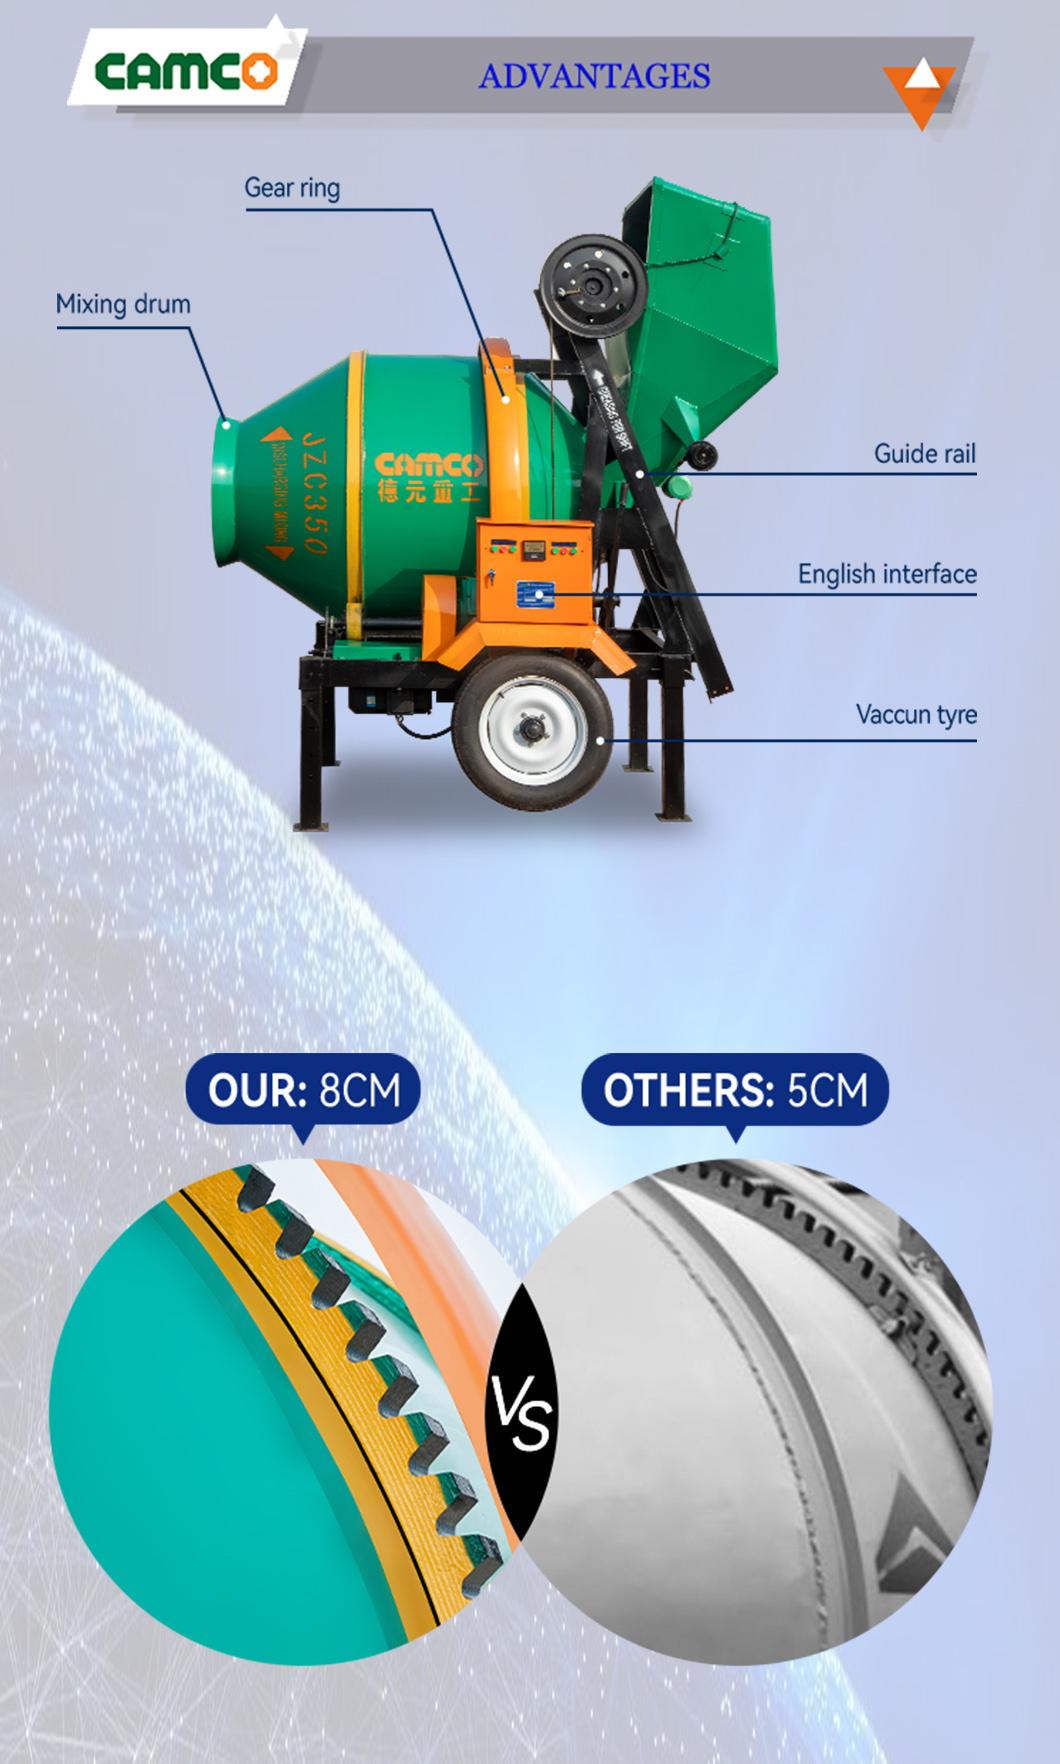 China Mini Mobile Portable Cement Mixing Machinery Volumetric Diesel Electric Petrol Small Jzc350 Mortar Self Loading Cement Mixer Machine for Sale Good Price